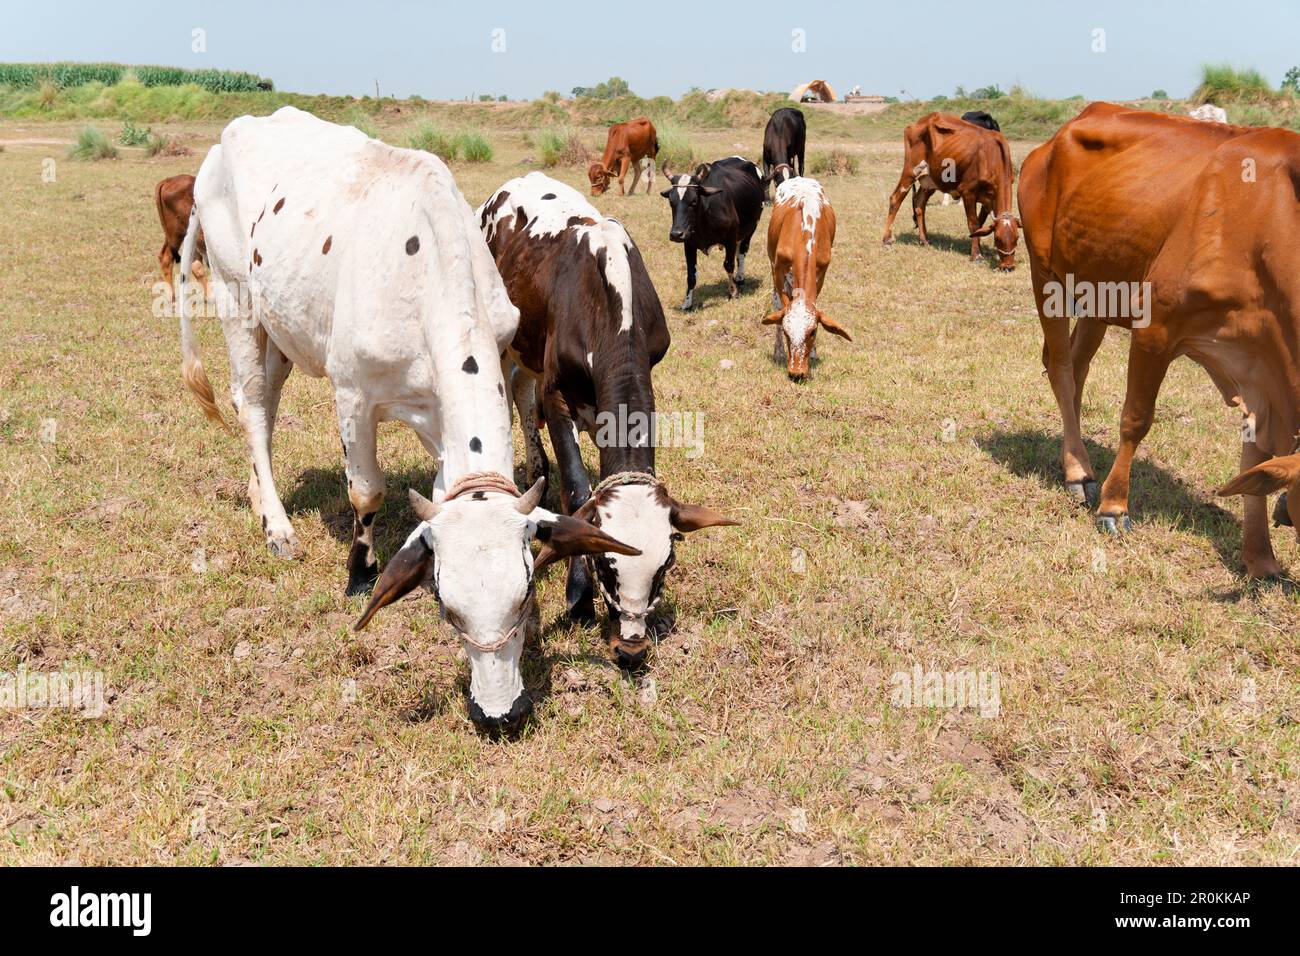 Cows in a grassy field on a bright and sunny day Stock Photo